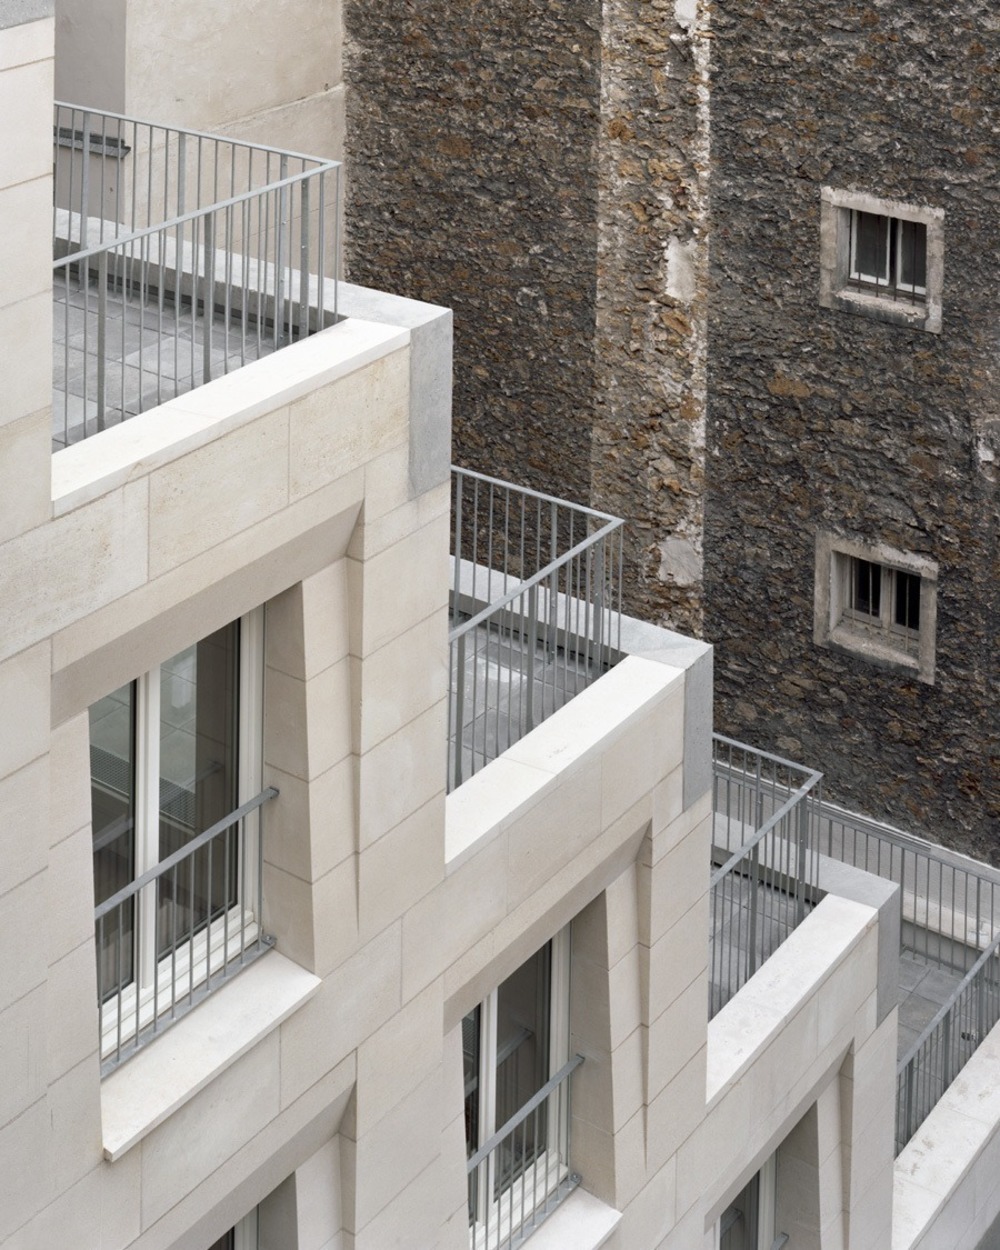 Alternate view of the social housing project in Paris